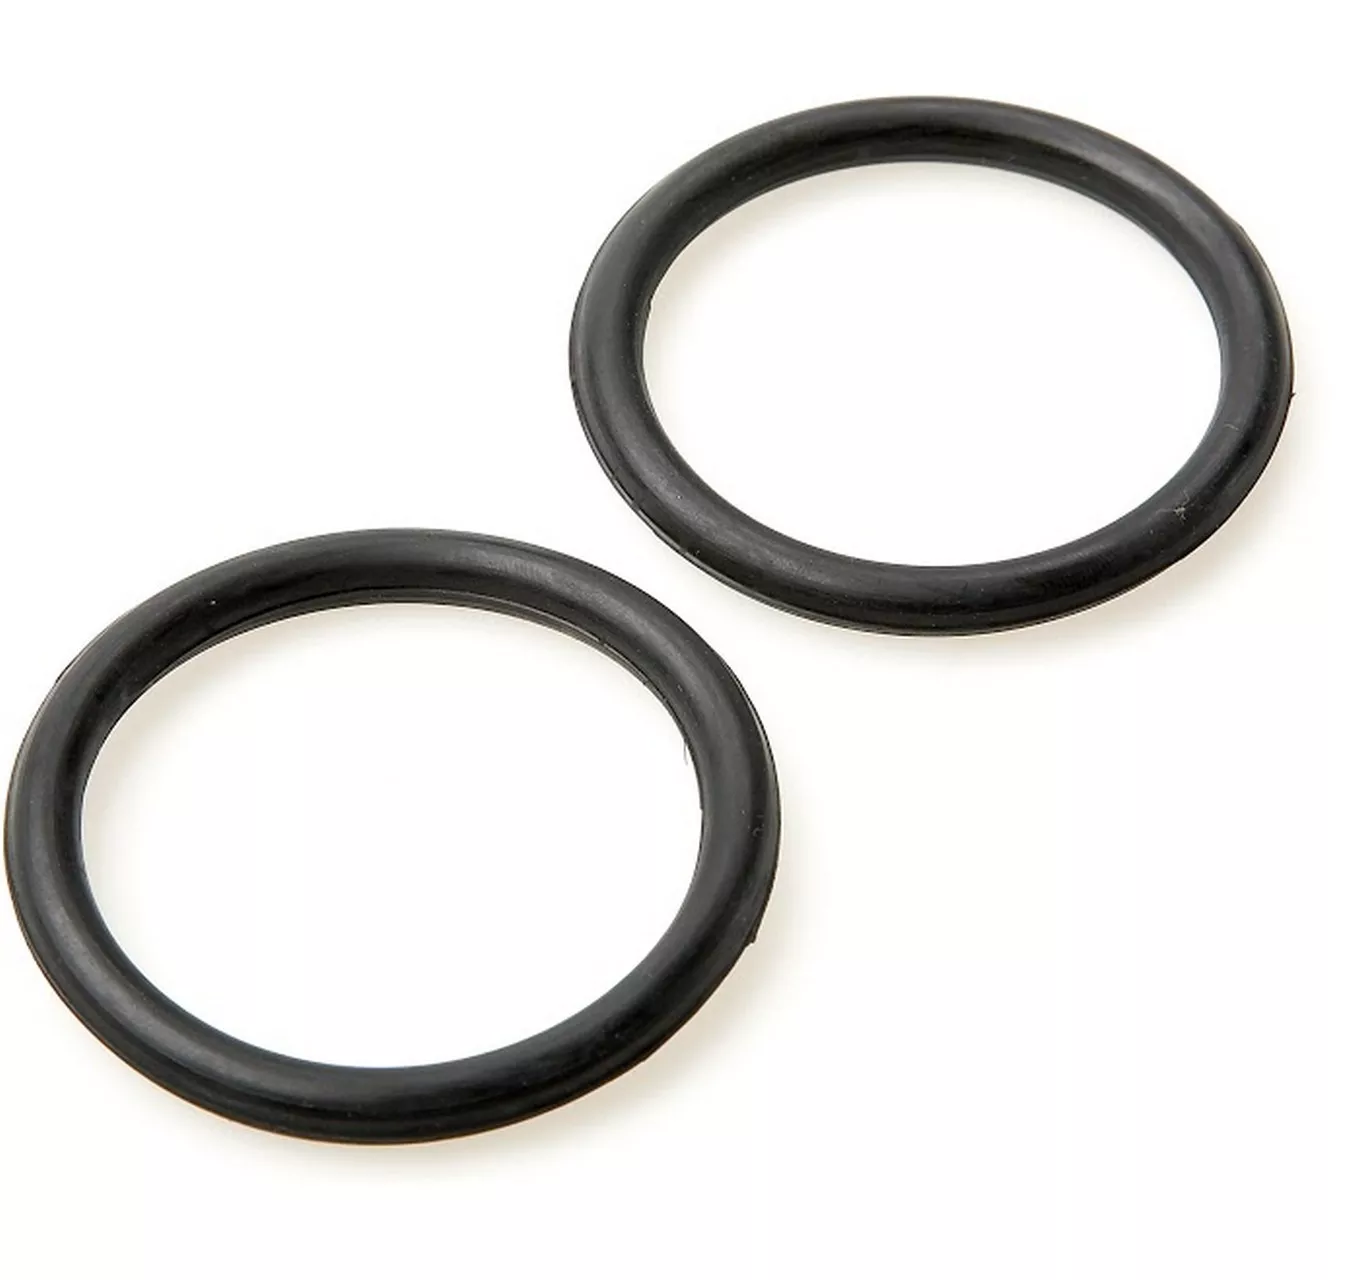 Rubber Rings for Safety Irons